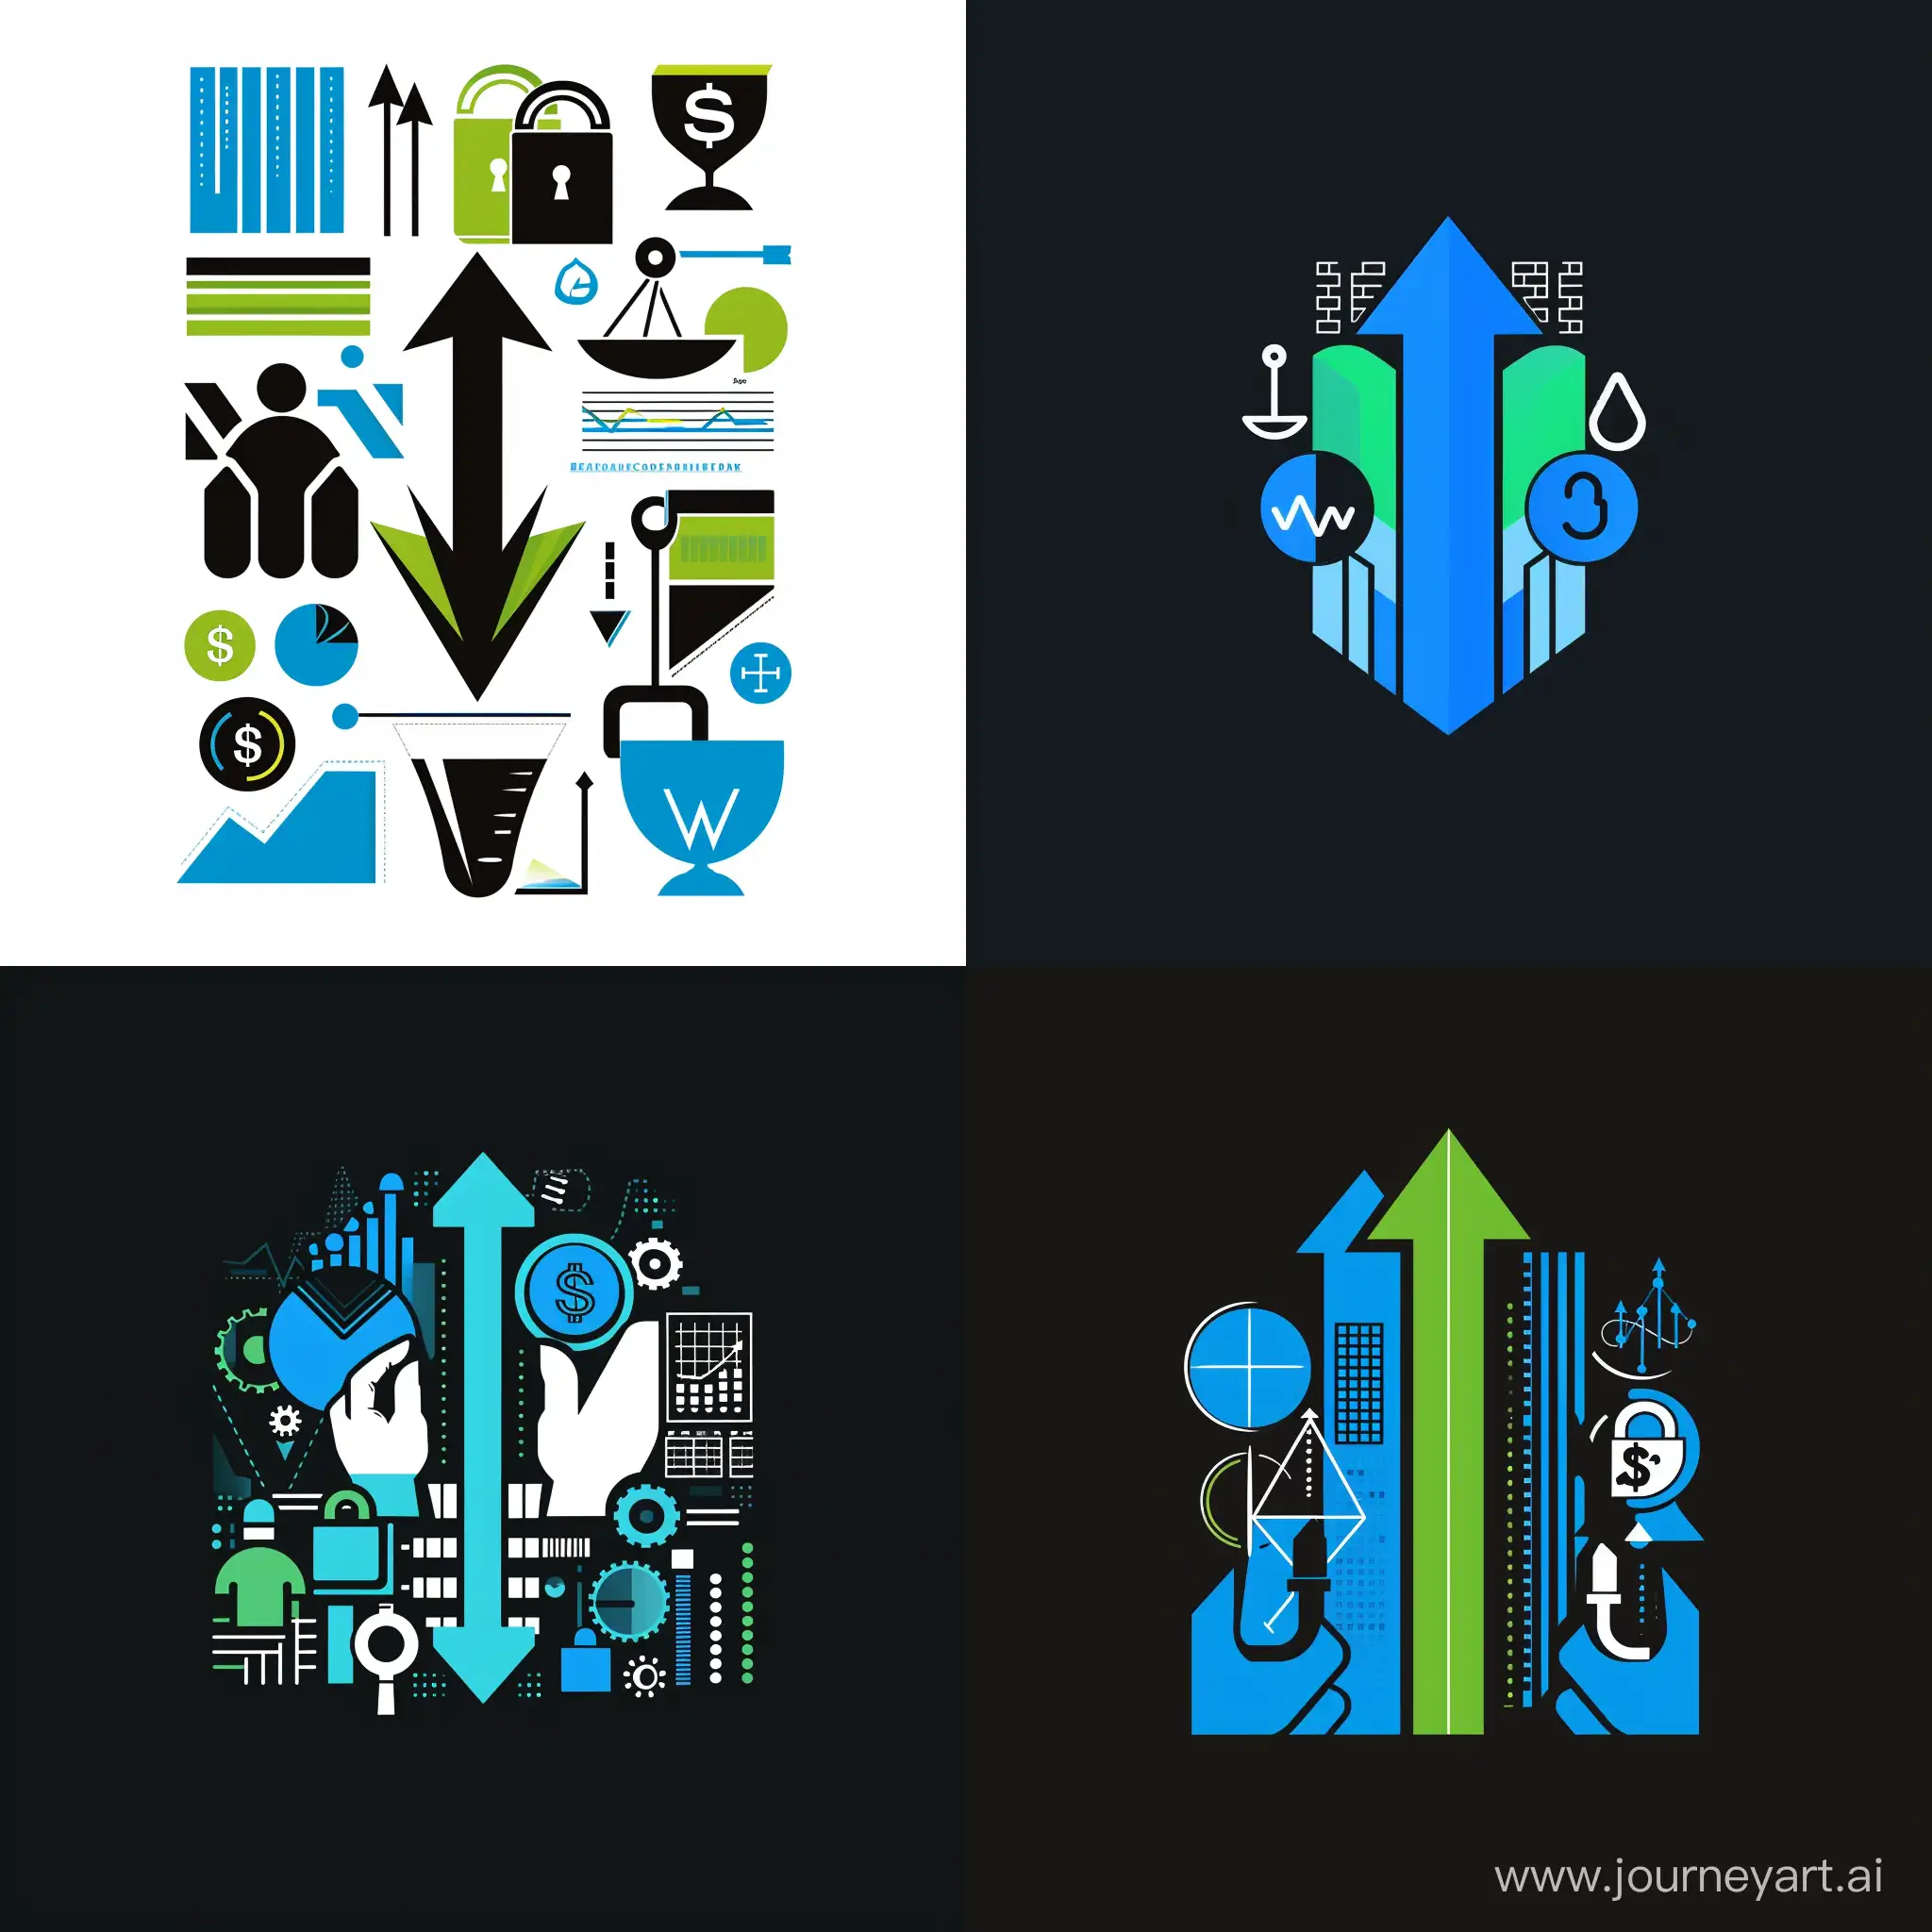 create a logo with Concept and Symbolism:

Abstract symbols: Consider using abstract symbols that represent growth, stability, trust, and security, such as arrows pointing upwards, graphs, scales, or locks.
Figurative symbols: You might use images related to finance, such as coins, bulls, or hands shaking. However, be mindful of cliches and strive for originality.
Typography: Focus on clean, professional fonts that are easy to read. You can use different weights and styles within the same font family to create visual interest.
Color Palette:

Traditional financial colors: Blue, green, and black are commonly used in financial logos as they convey trust, stability, and professionalism.
Contrasting colors: Consider using a bold, contrasting color to make your logo stand out. However, avoid overly bright or neon colors that might appear unprofessional.
Brand consistency: Ensure the colors you choose align with your overall brand identity.
Style and Layout:

Minimalist: Clean and uncluttered designs are often favored in the financial industry.
Modern: Use modern design elements to create a fresh and up-to-date look.
Elegant: Opt for a sophisticated and refined design to convey expertise and prestige.
Additional Tips:

Get feedback: Share your logo design with potential clients or colleagues for feedback before finalizing it.
Consider multiple formats: Ensure your logo looks good in both digital and print formats.
Use a professional designer: If you have the budget, consider hiring a professional graphic designer to create a unique and memorable logo for your company.
Here are some examples of professional logos for investment, accounting, and financial consulting companies:

Vanguard: Uses a simple arrow symbol and blue color palette to convey growth and stability.
 --v 6 --ar 1:1 --no 80186